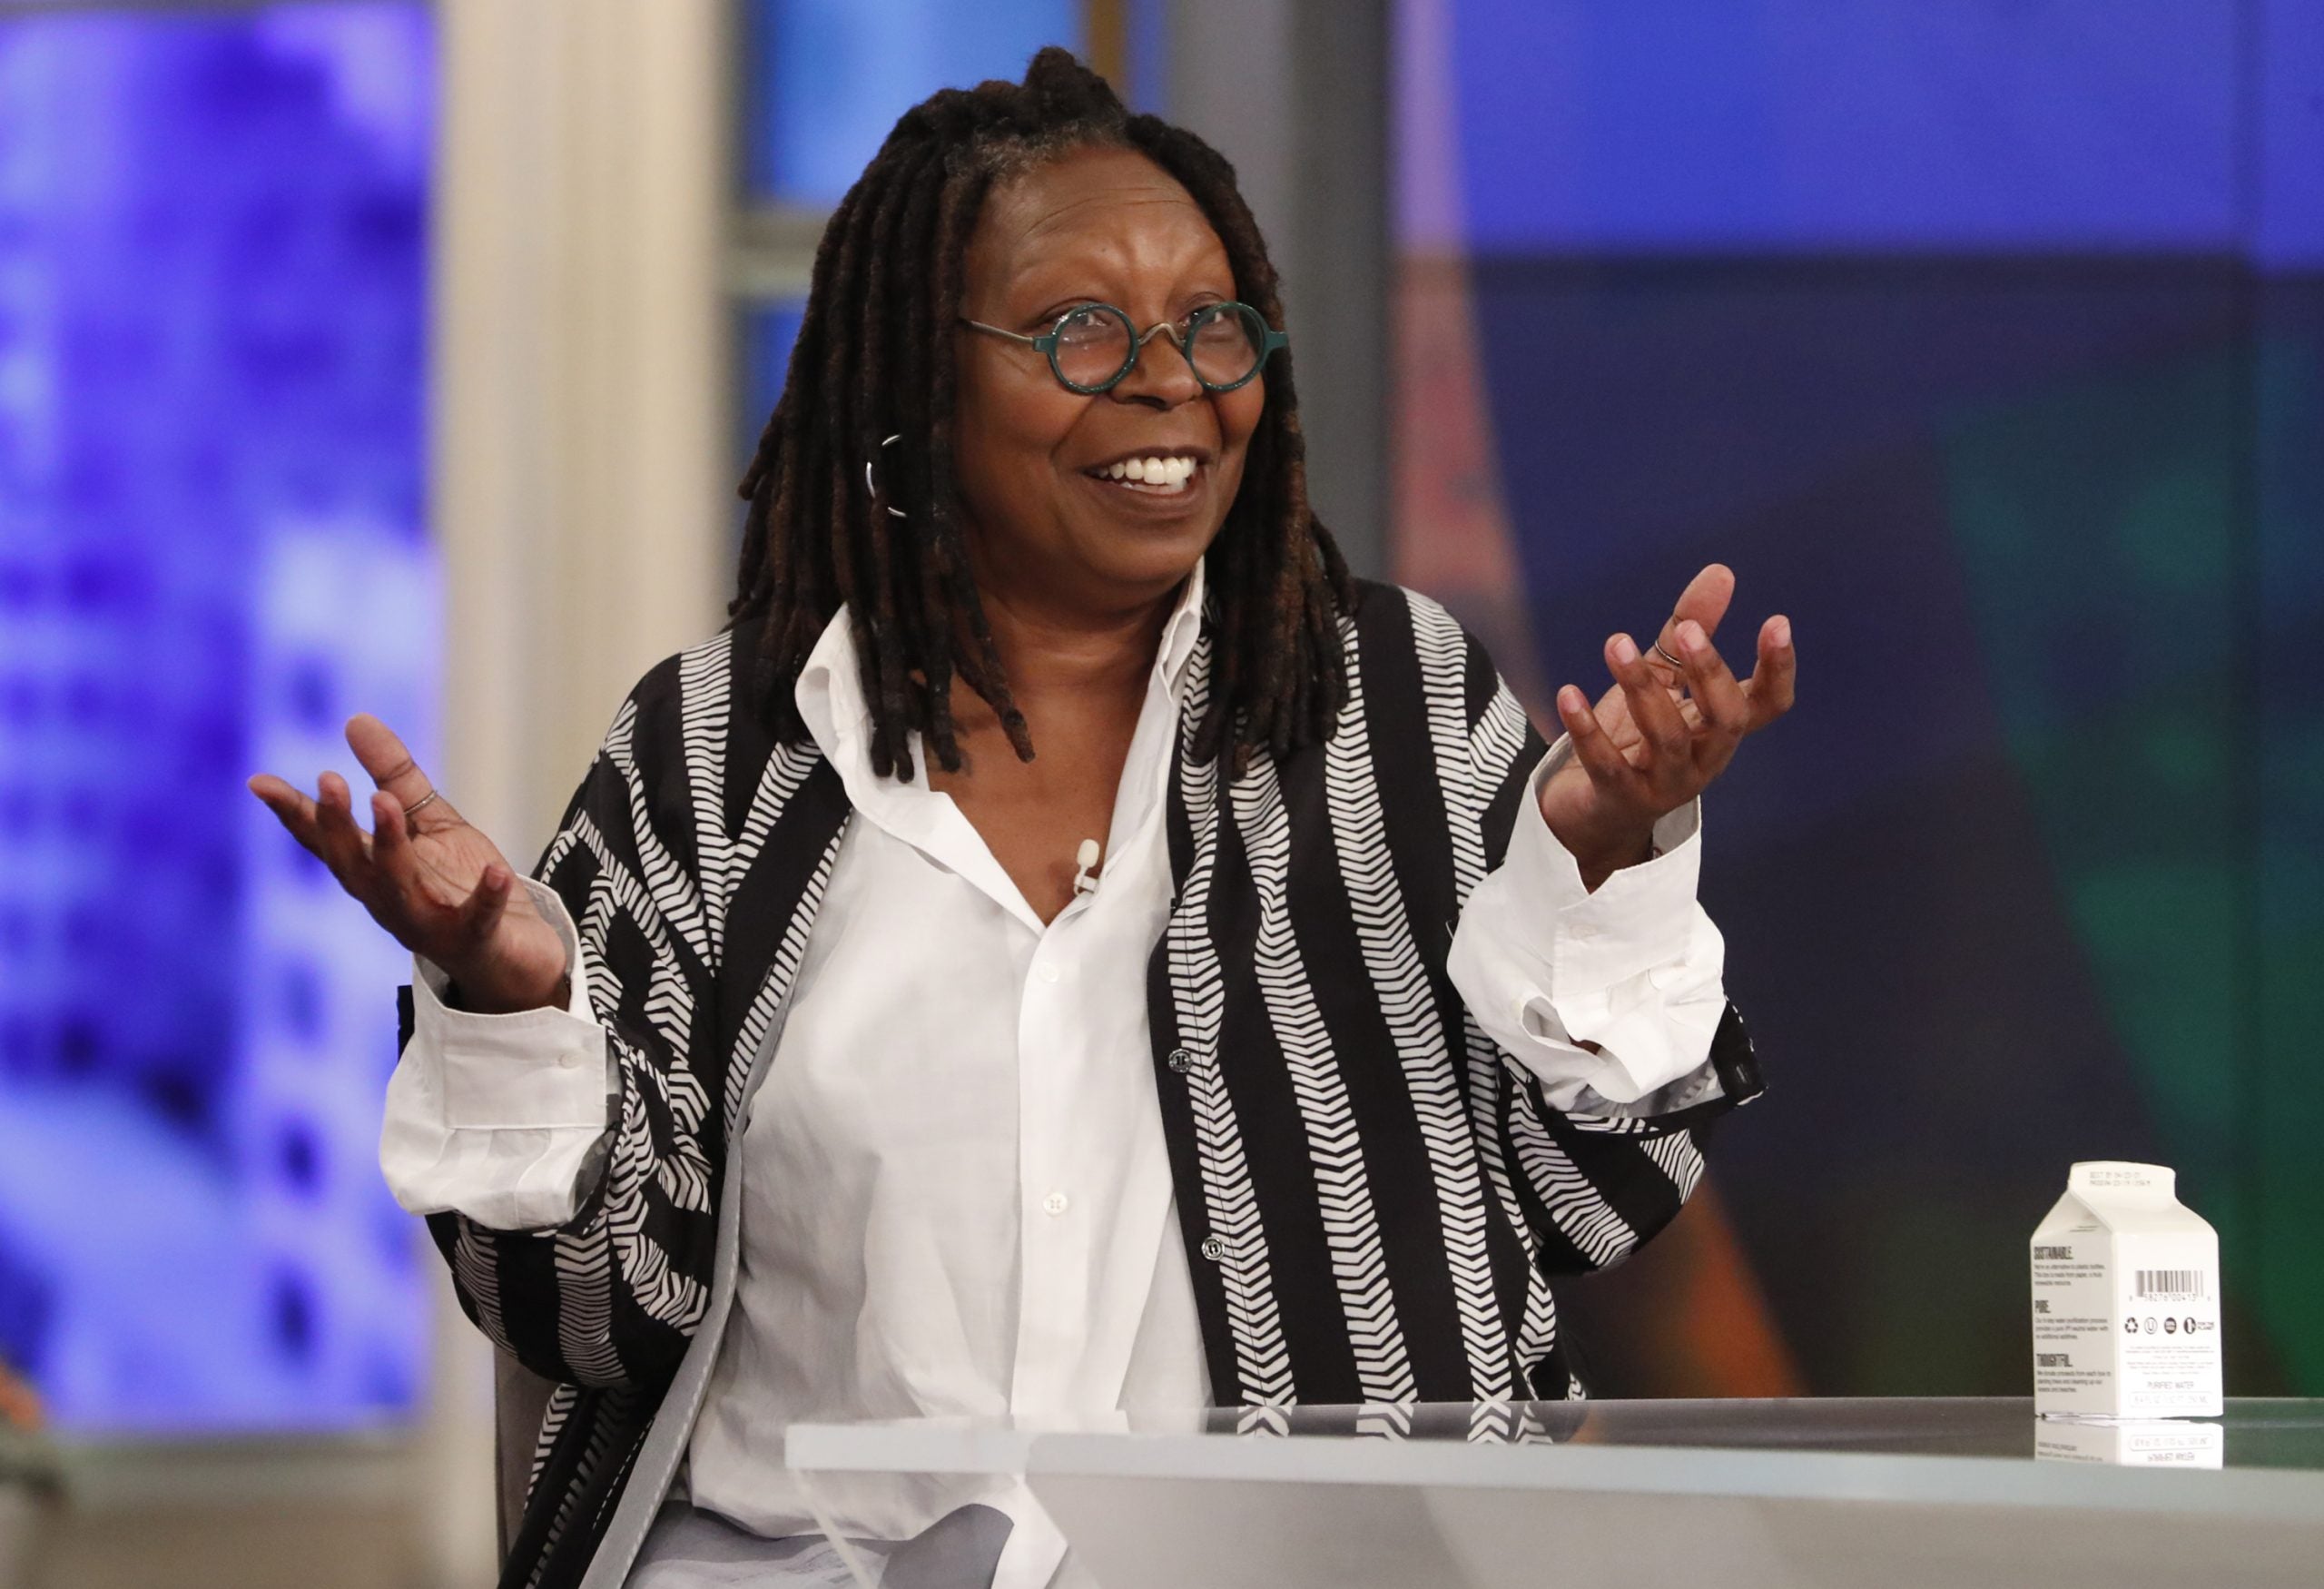 Whoopi Goldberg Suspended From ‘The View’ Over Classifying The Holocaust As “Evil” Rather Than “Racial”